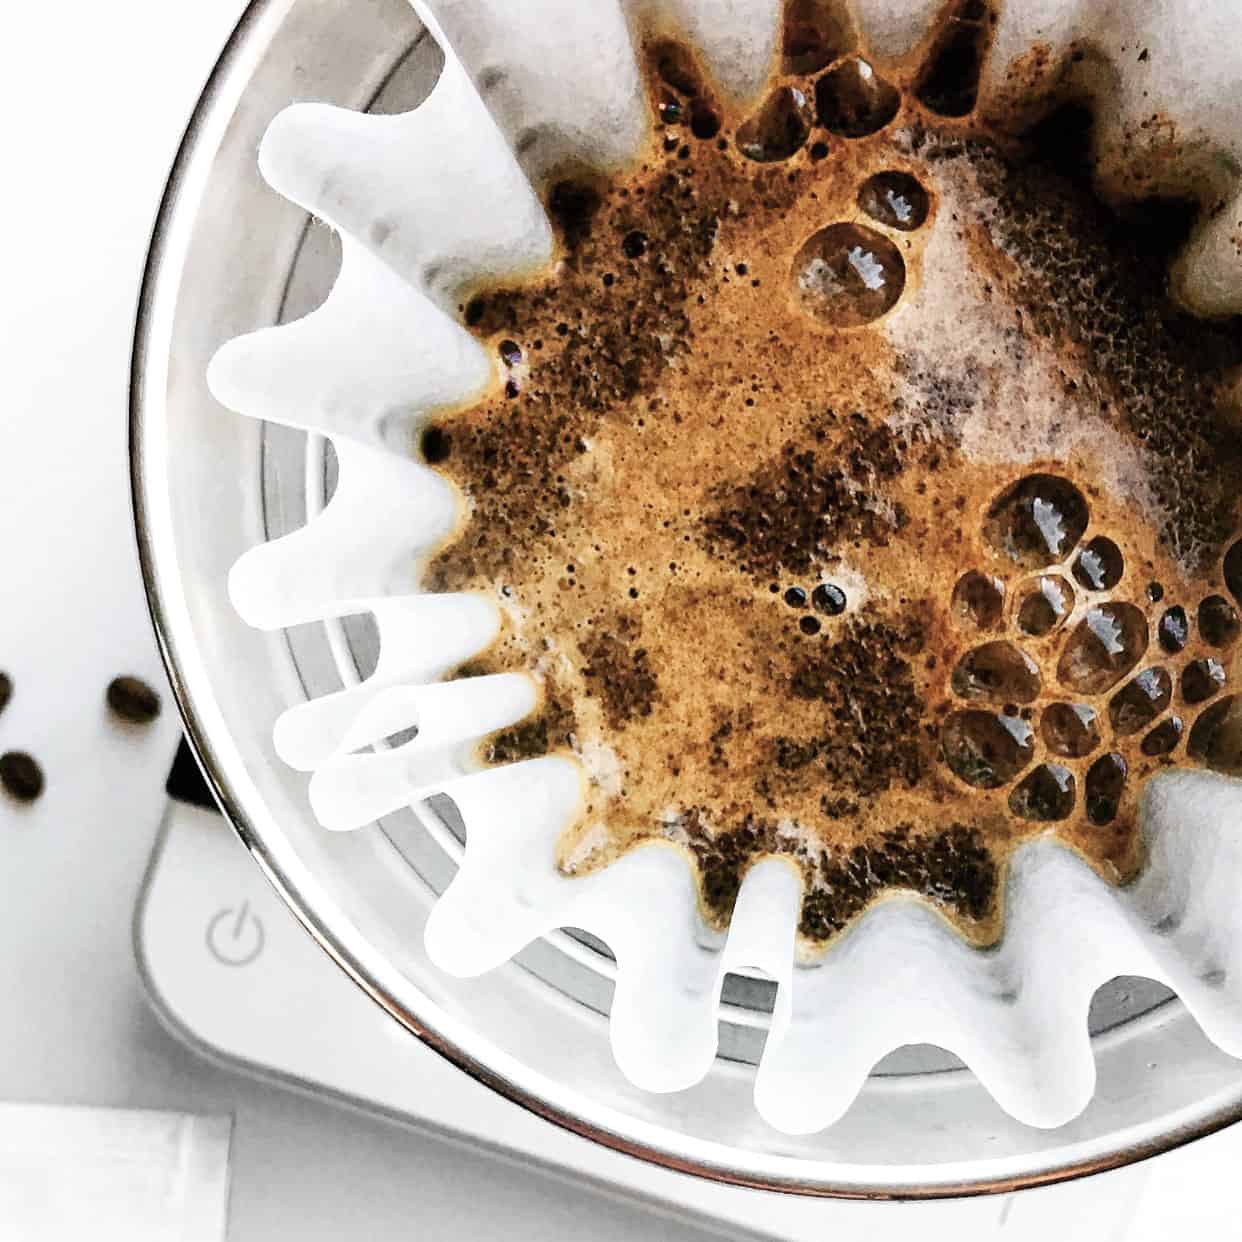 kalita pour over dripper differences